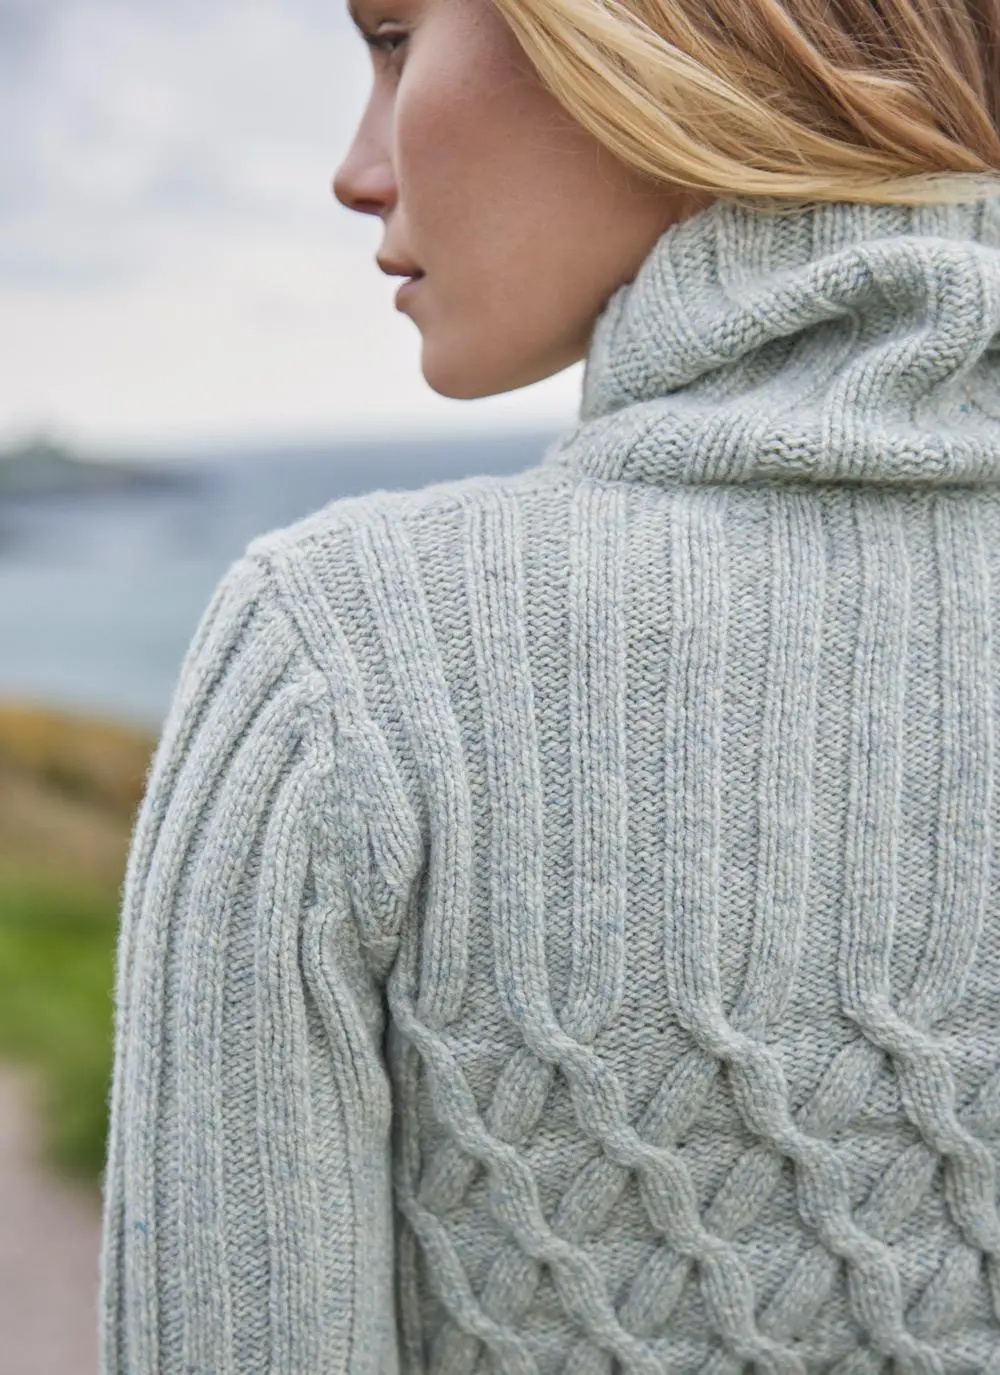 detail shot of woman wearing a neutral colored turtle neck aran sweater